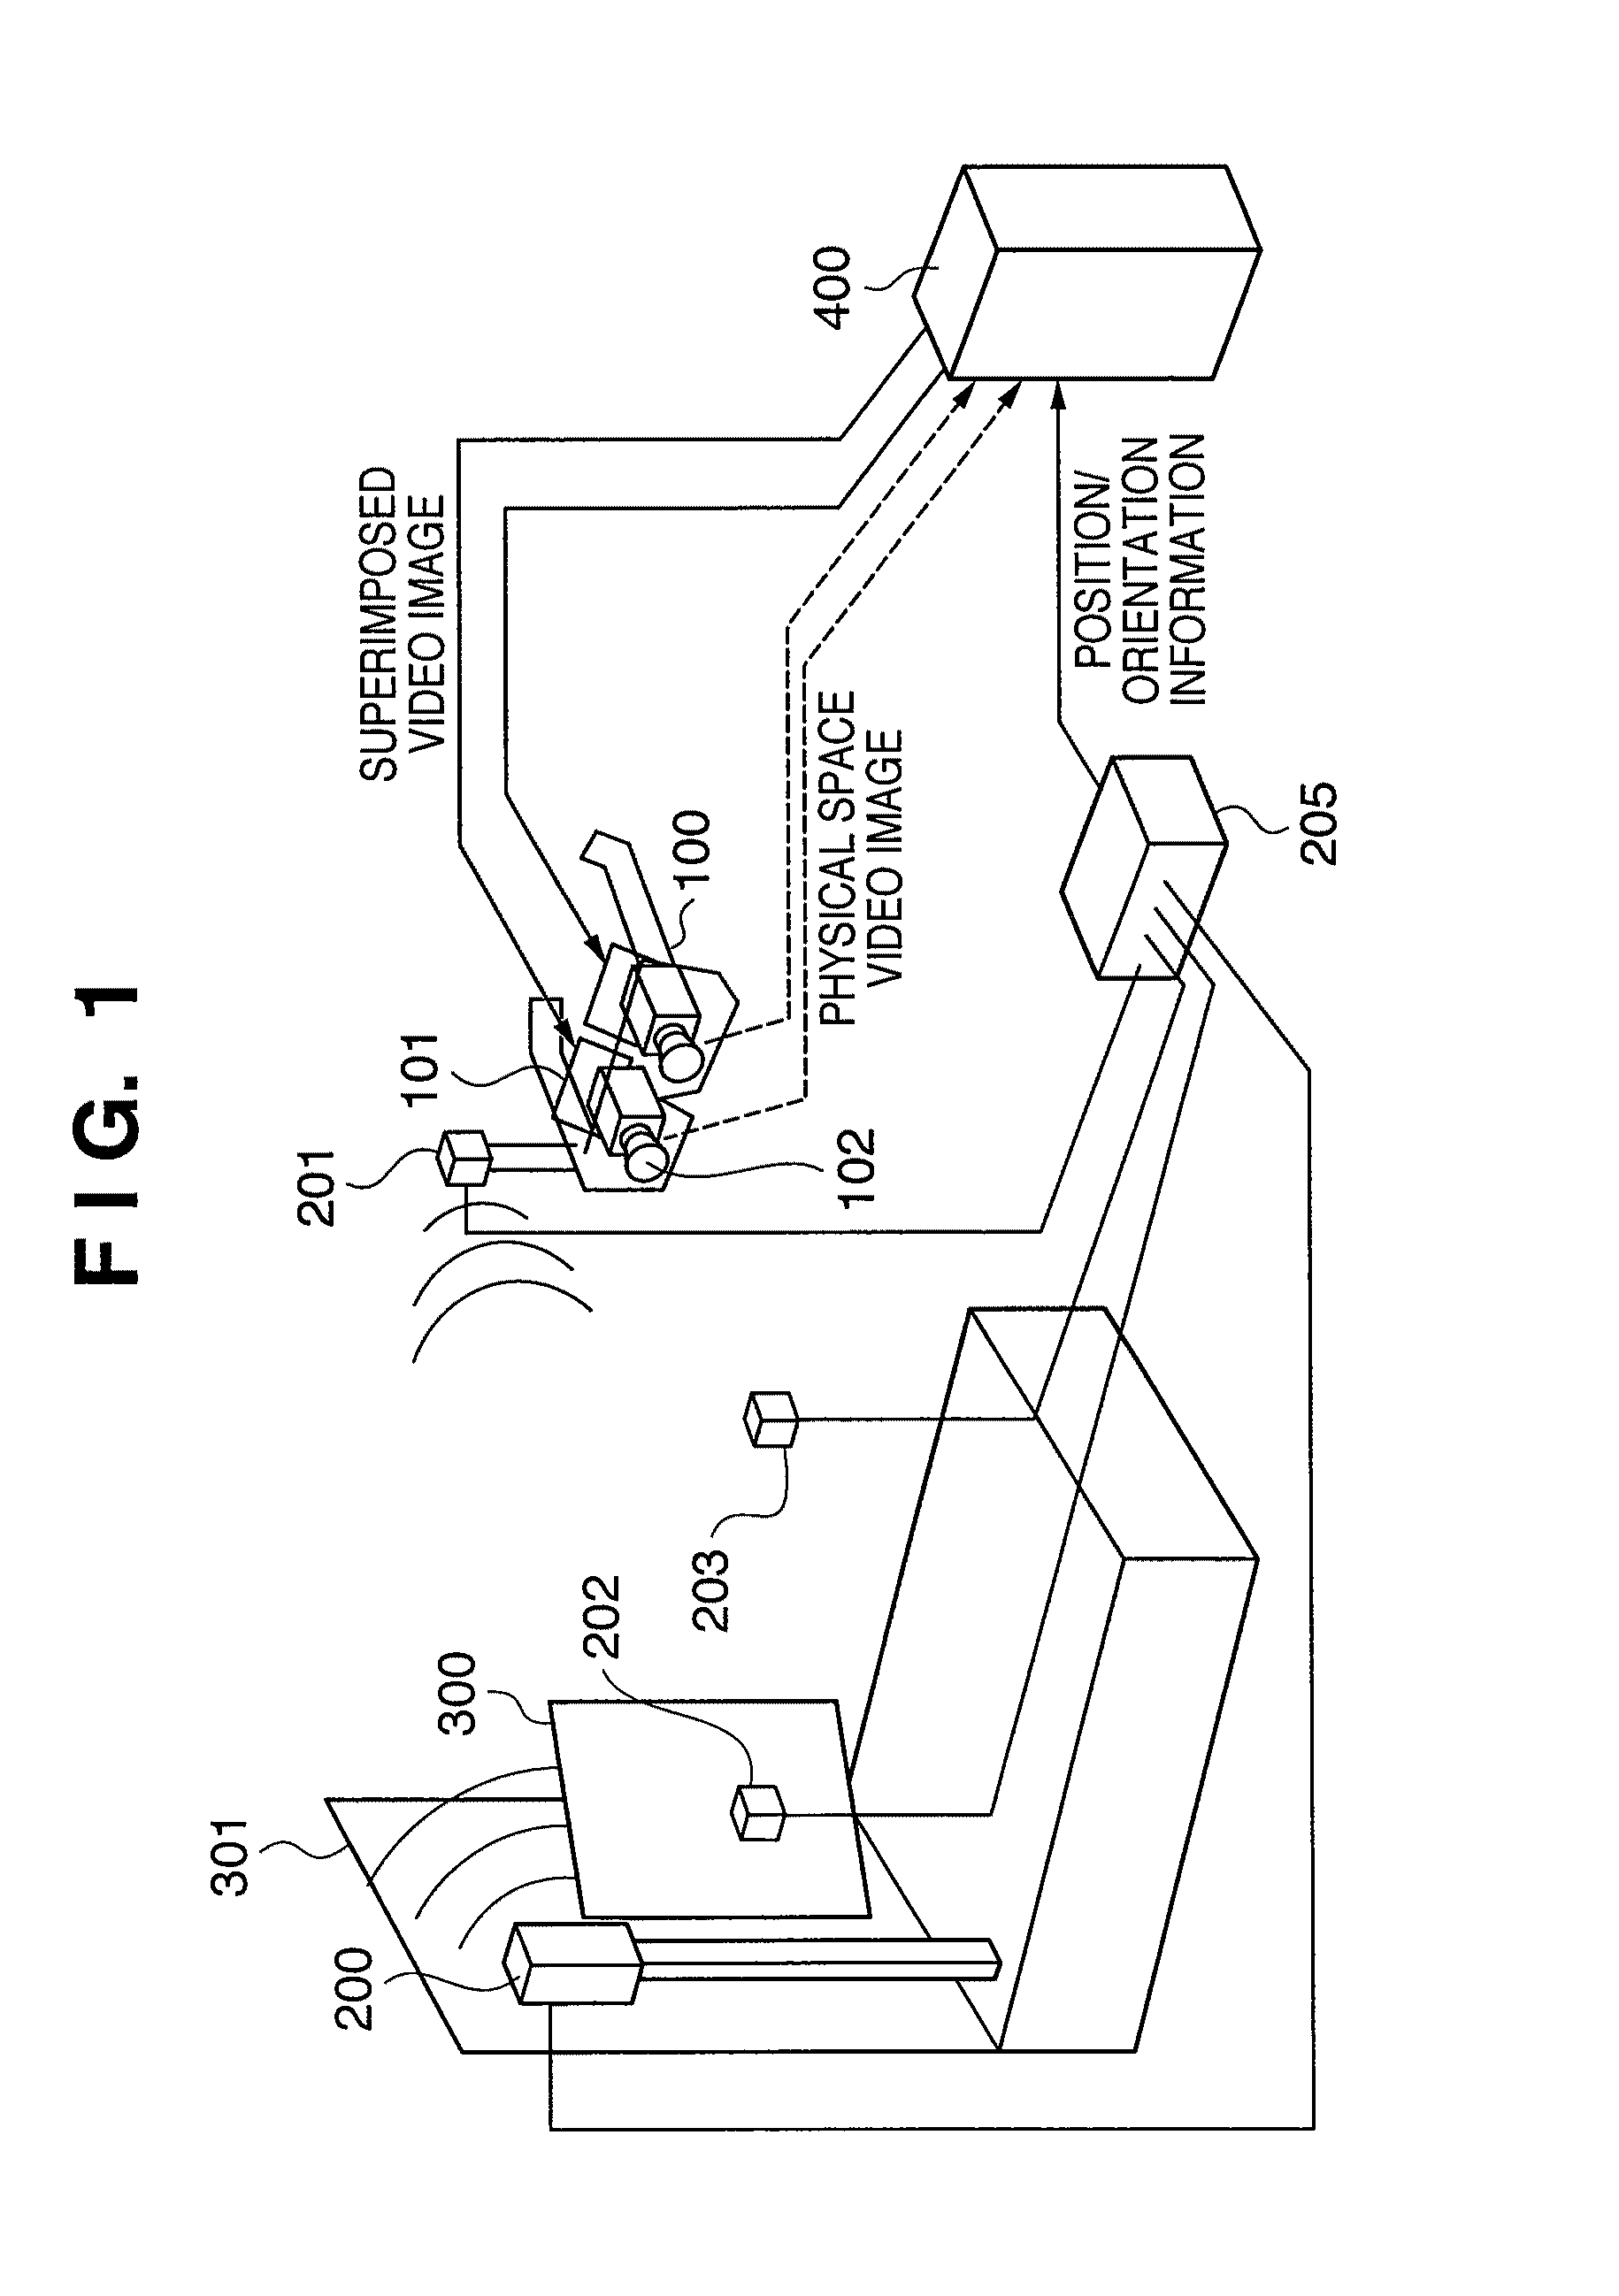 Method and apparatus for generating three-dimensional model information